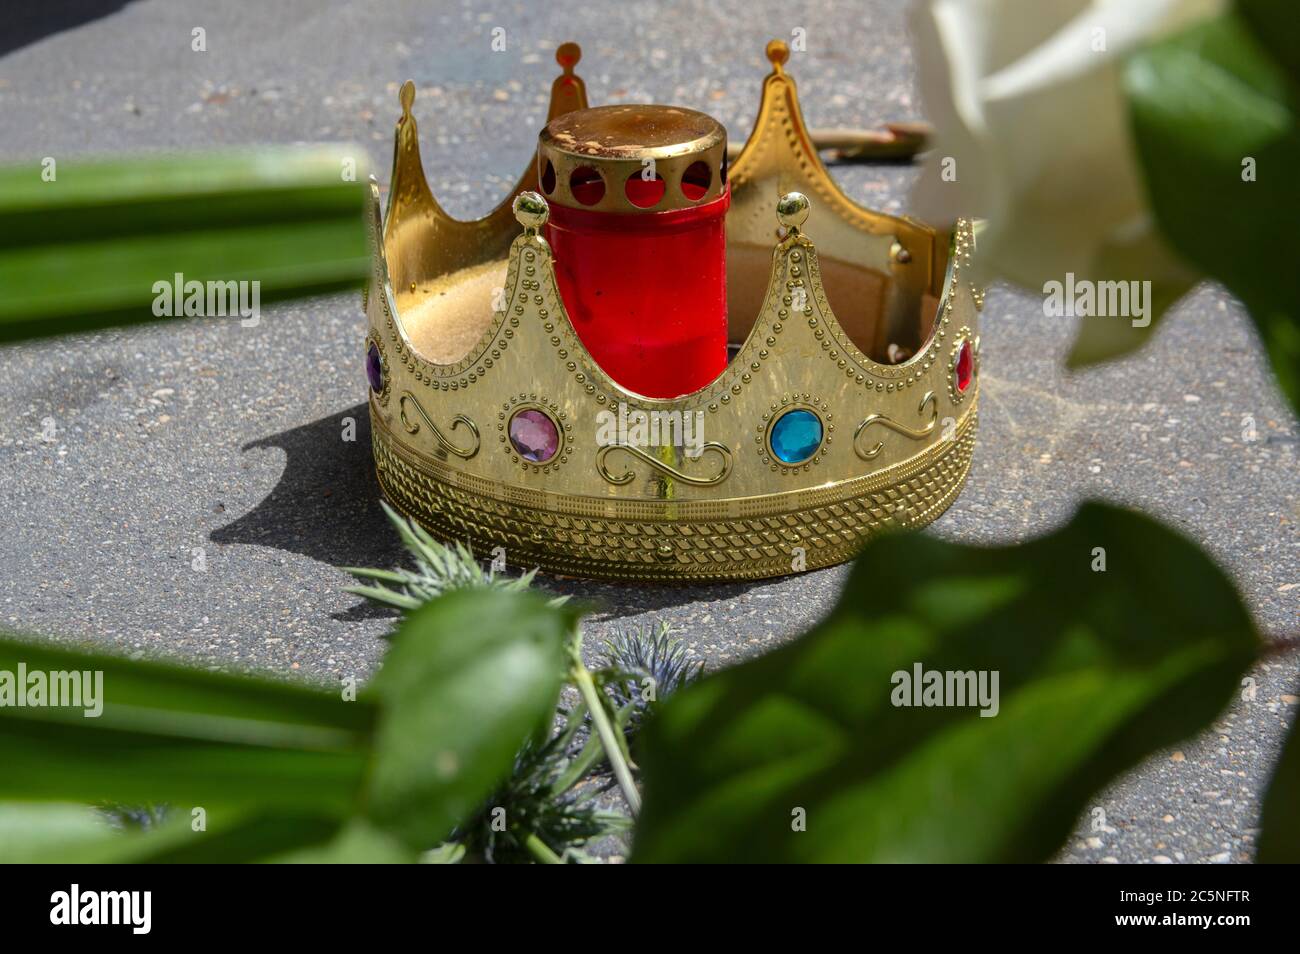 Crown On The National Slavery Monument At The Keti Koti Festival At Amsterdam The Netherlands 2-7-2020 Stock Photo